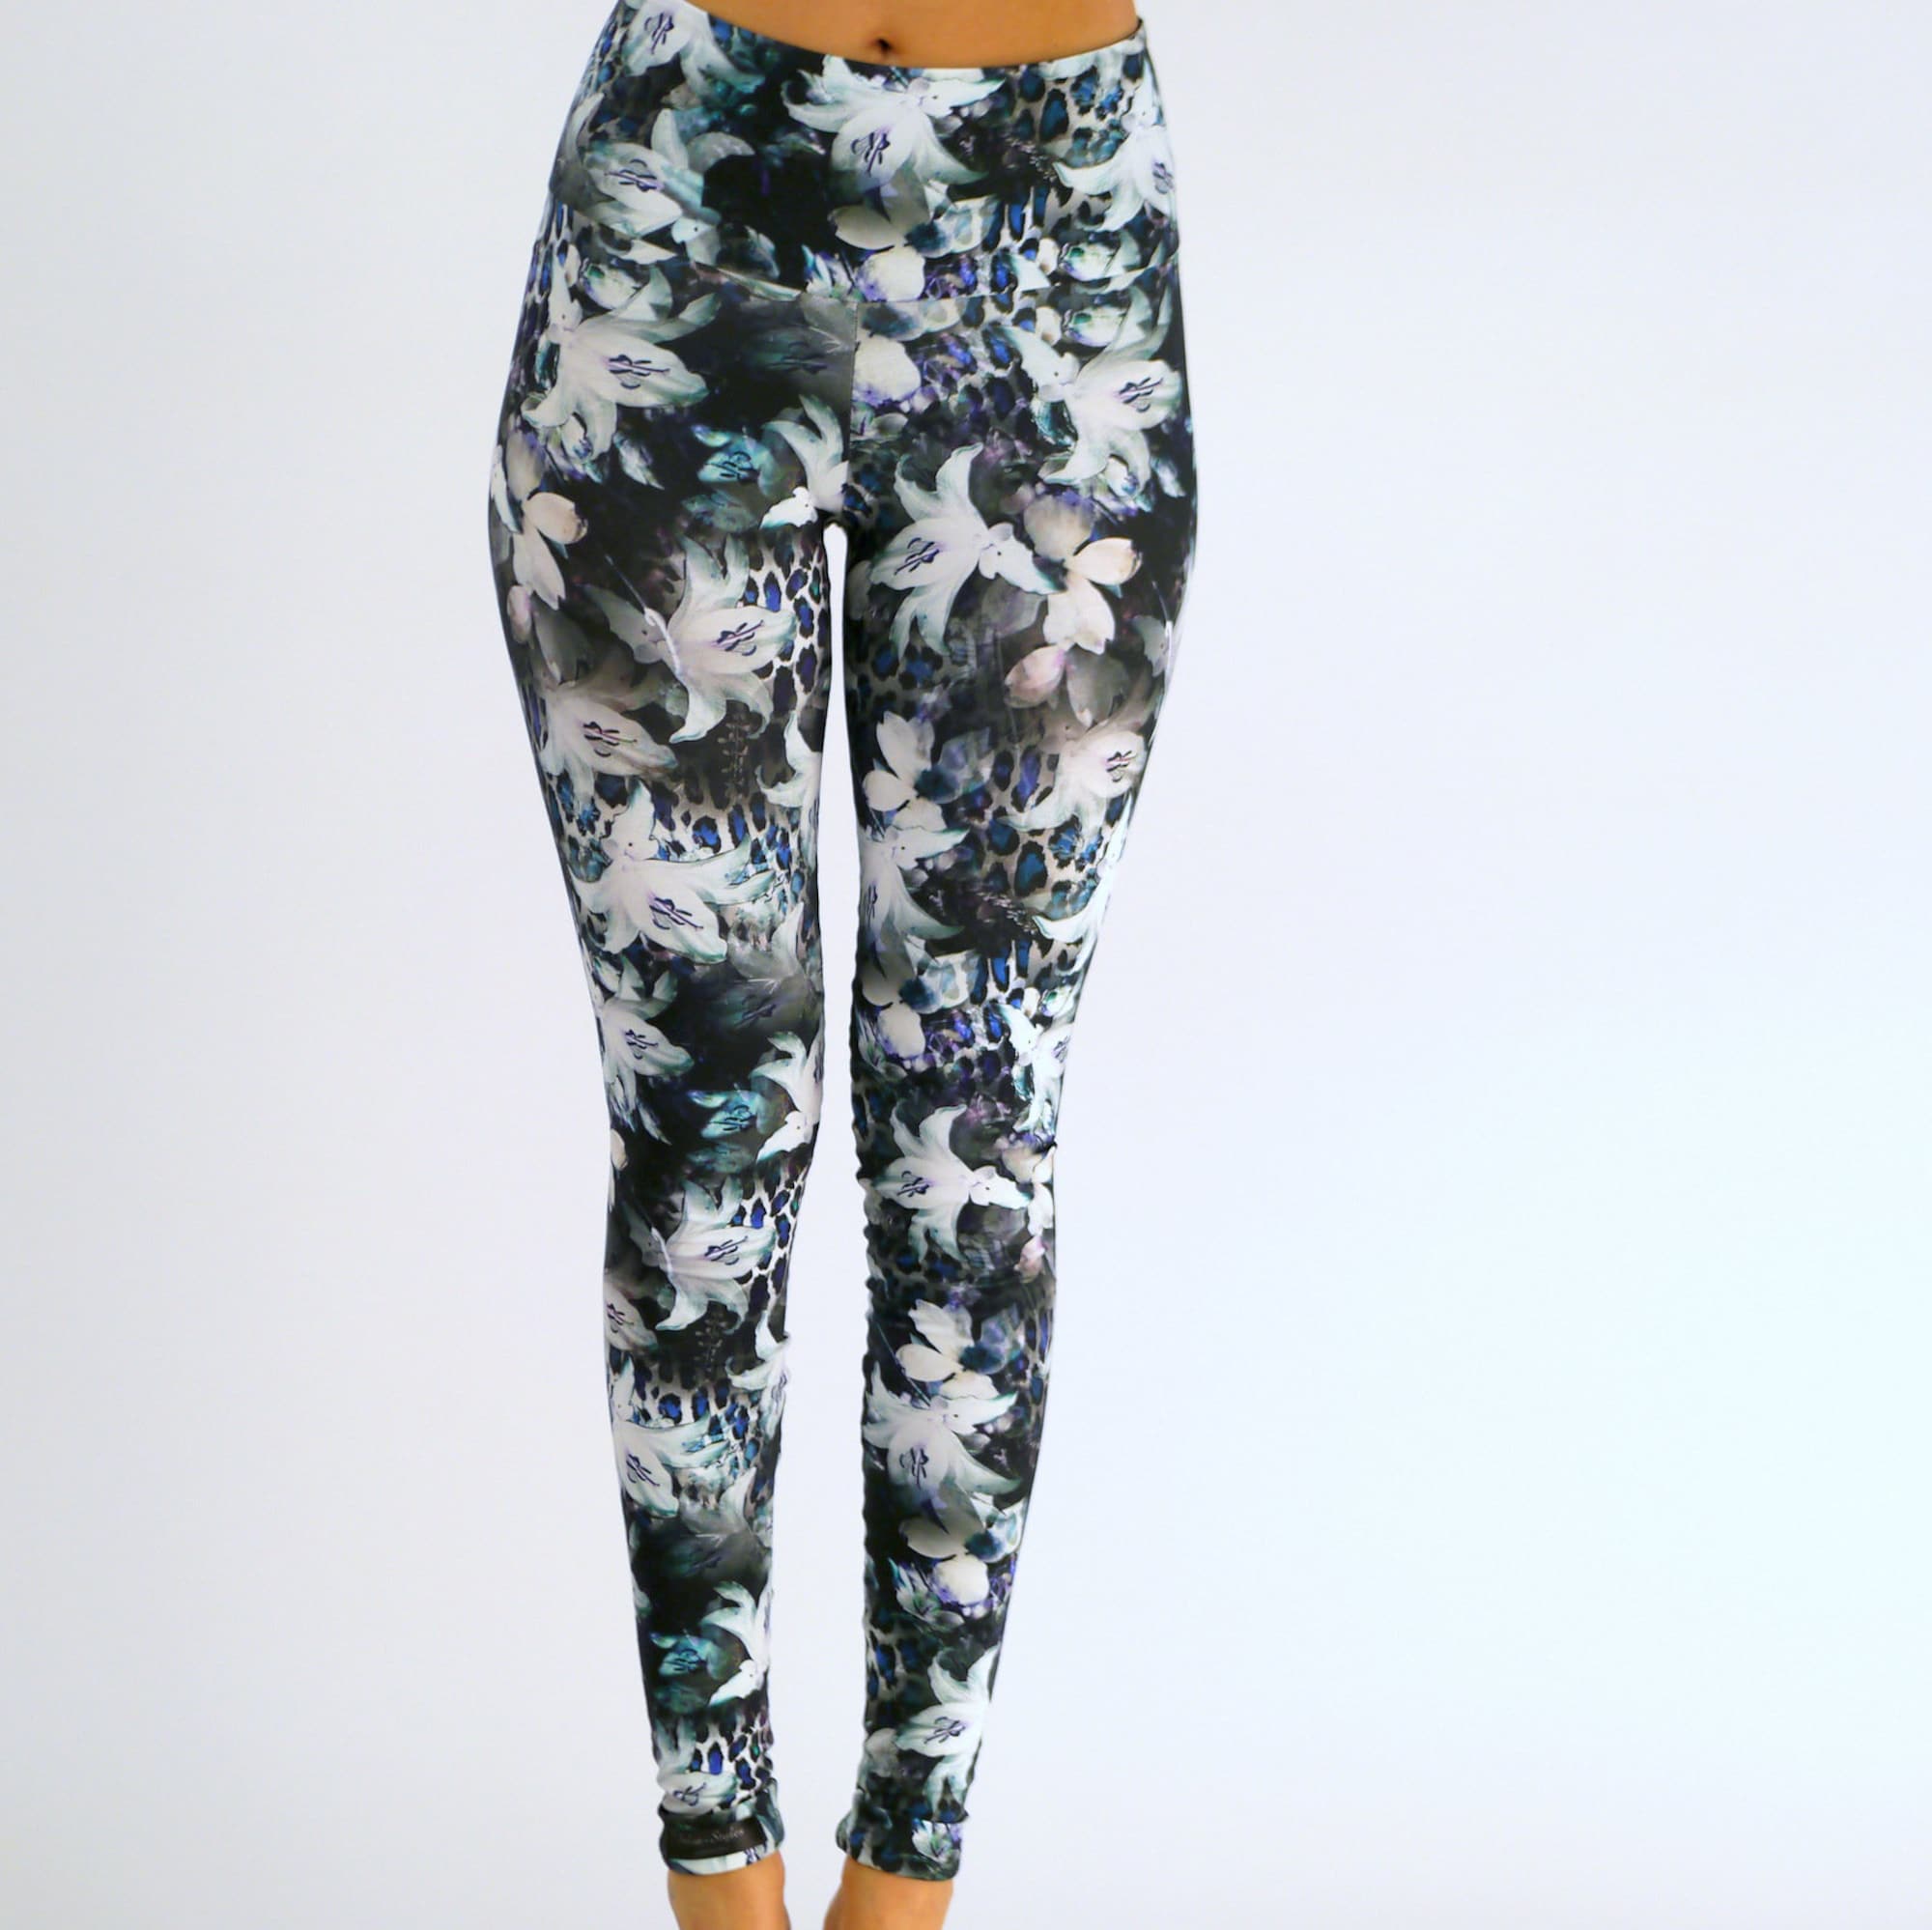 Discover Cotton leggings with floral motif